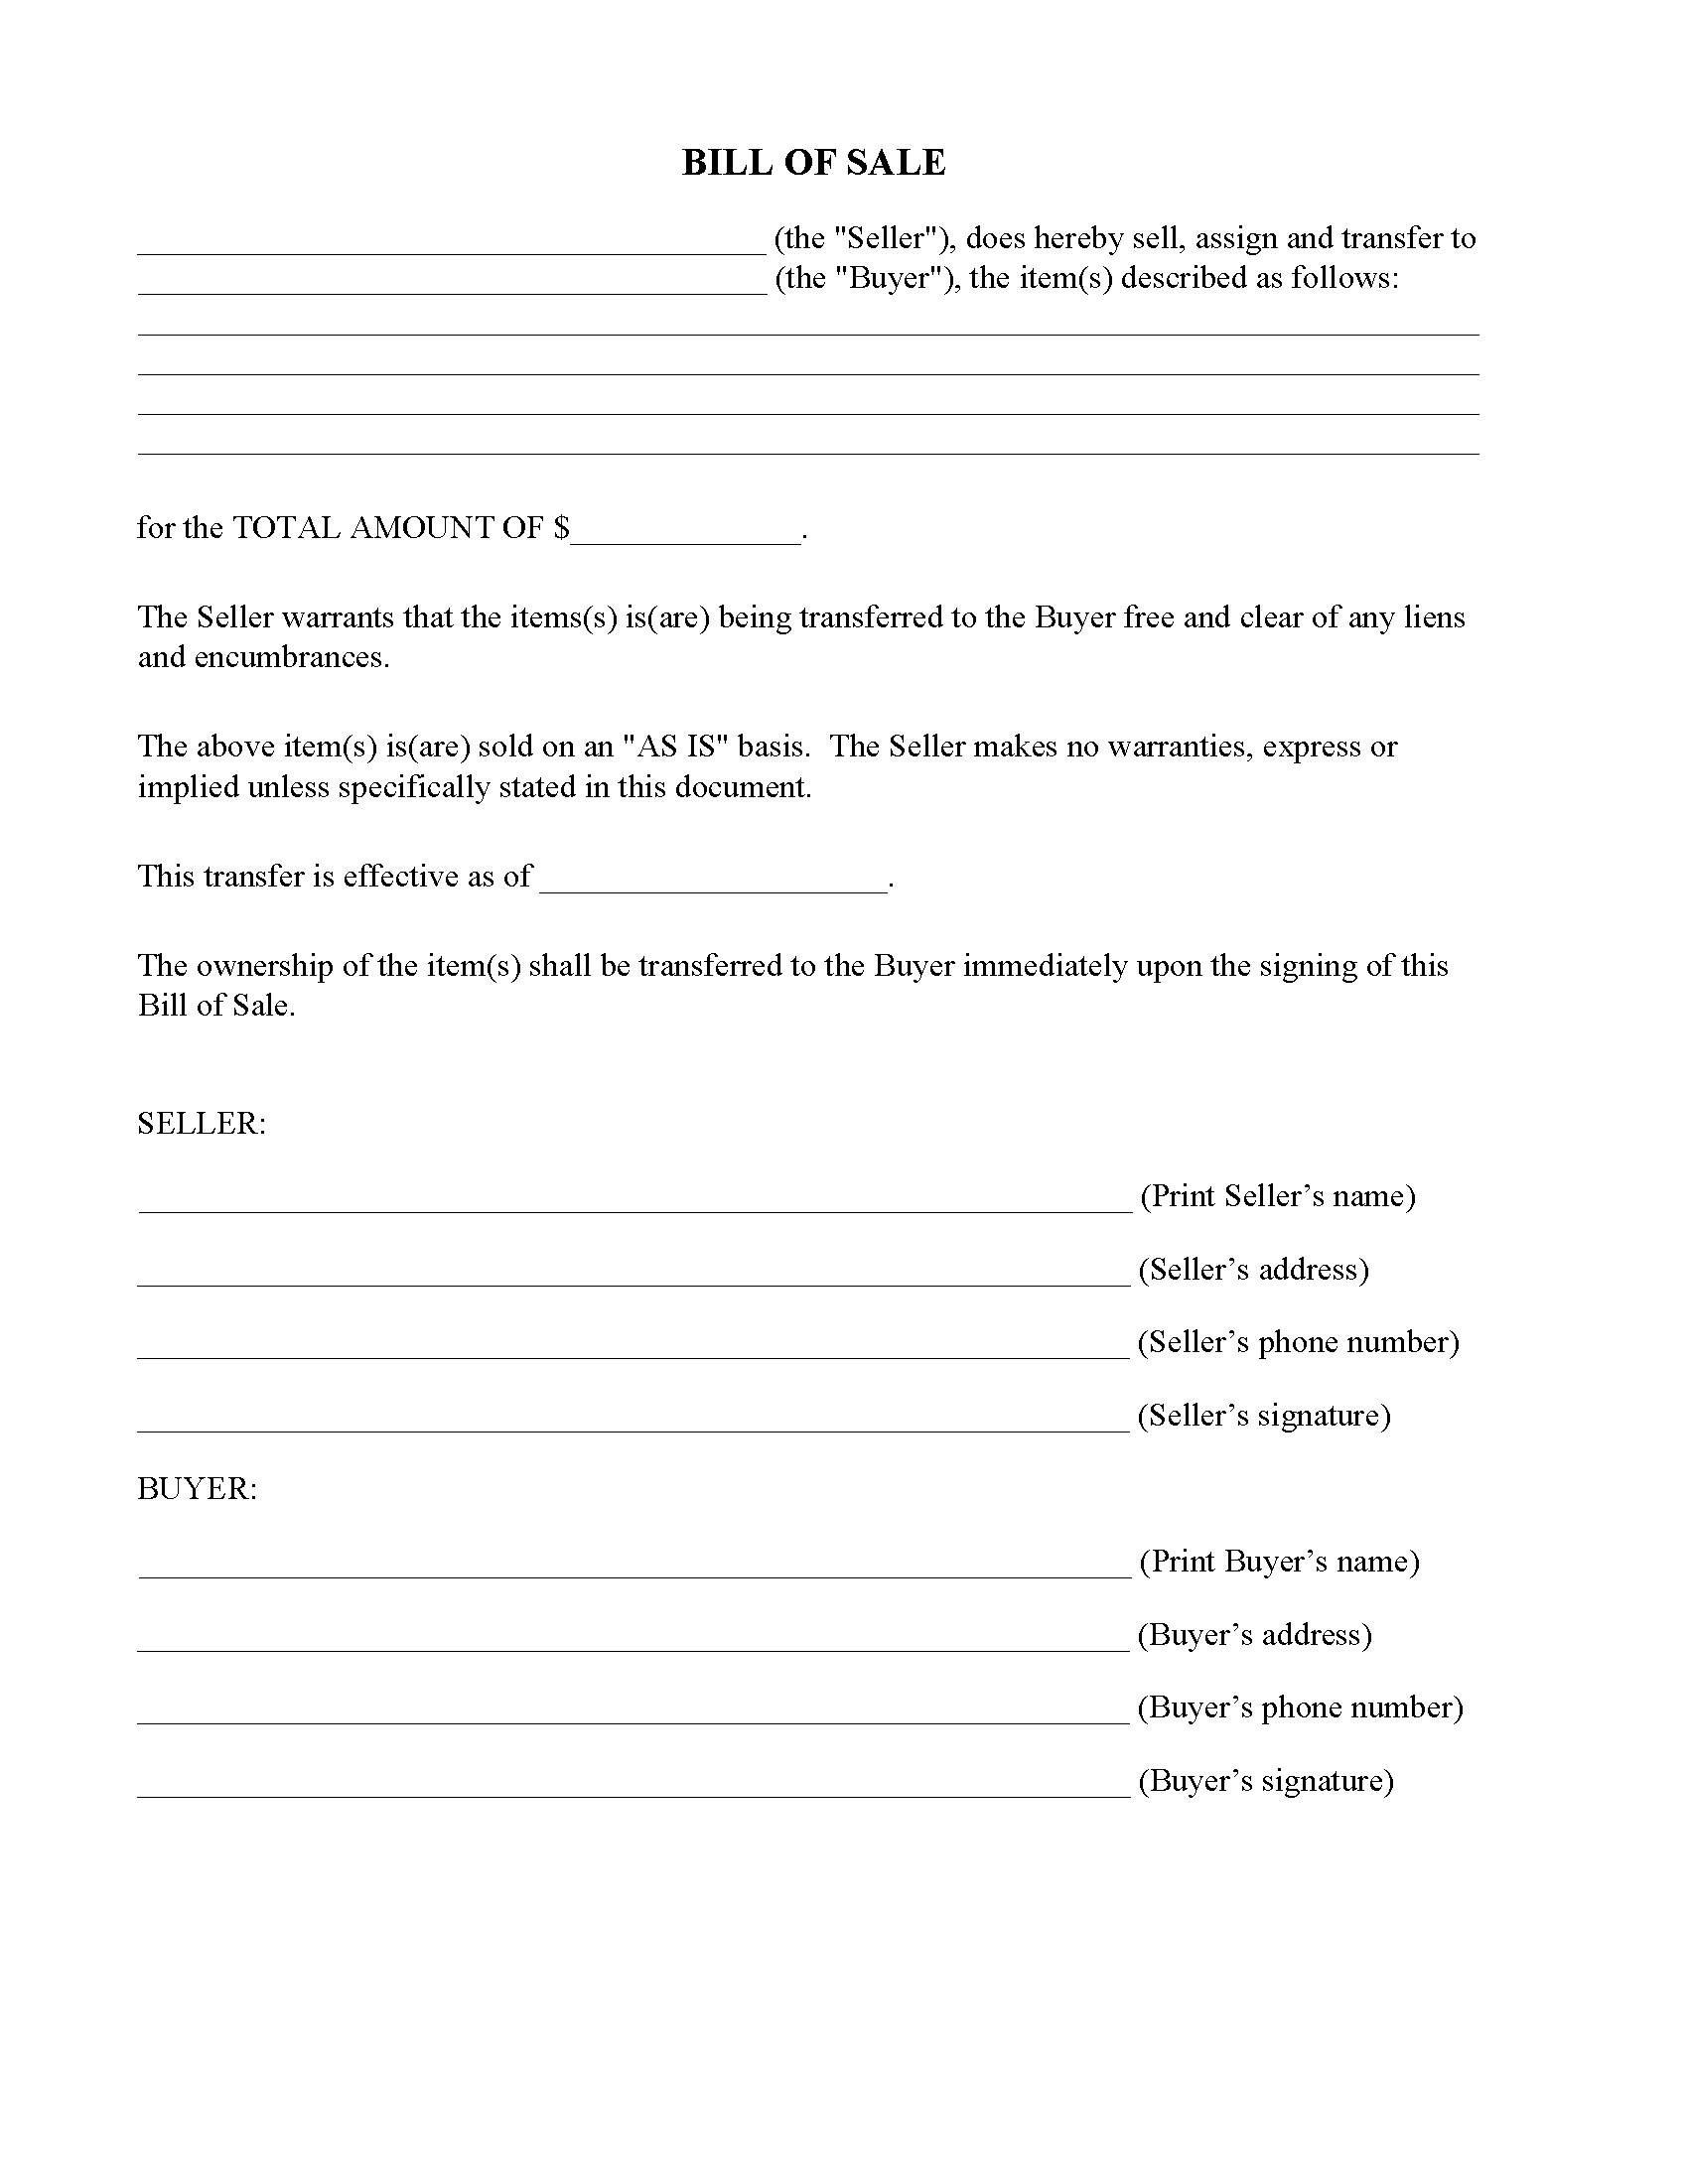 Rhode Island Simple Bill of Sale Form - Word - Free Printable Intended For Bill Of Sale Template Ri